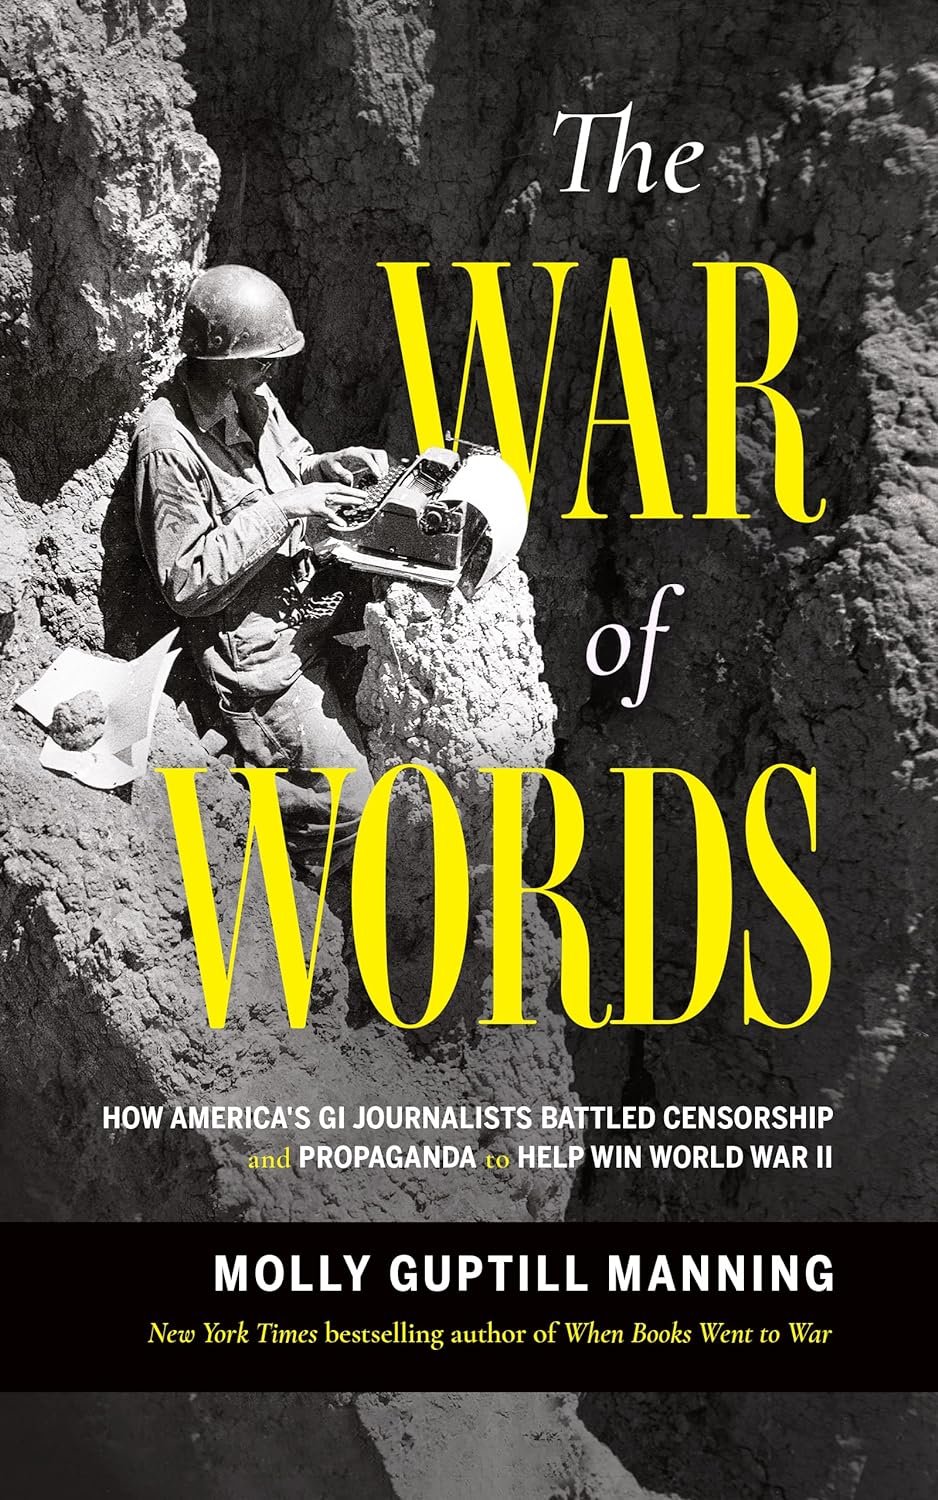 "The War of Words" by Molly Guptill Manning (WSJ)